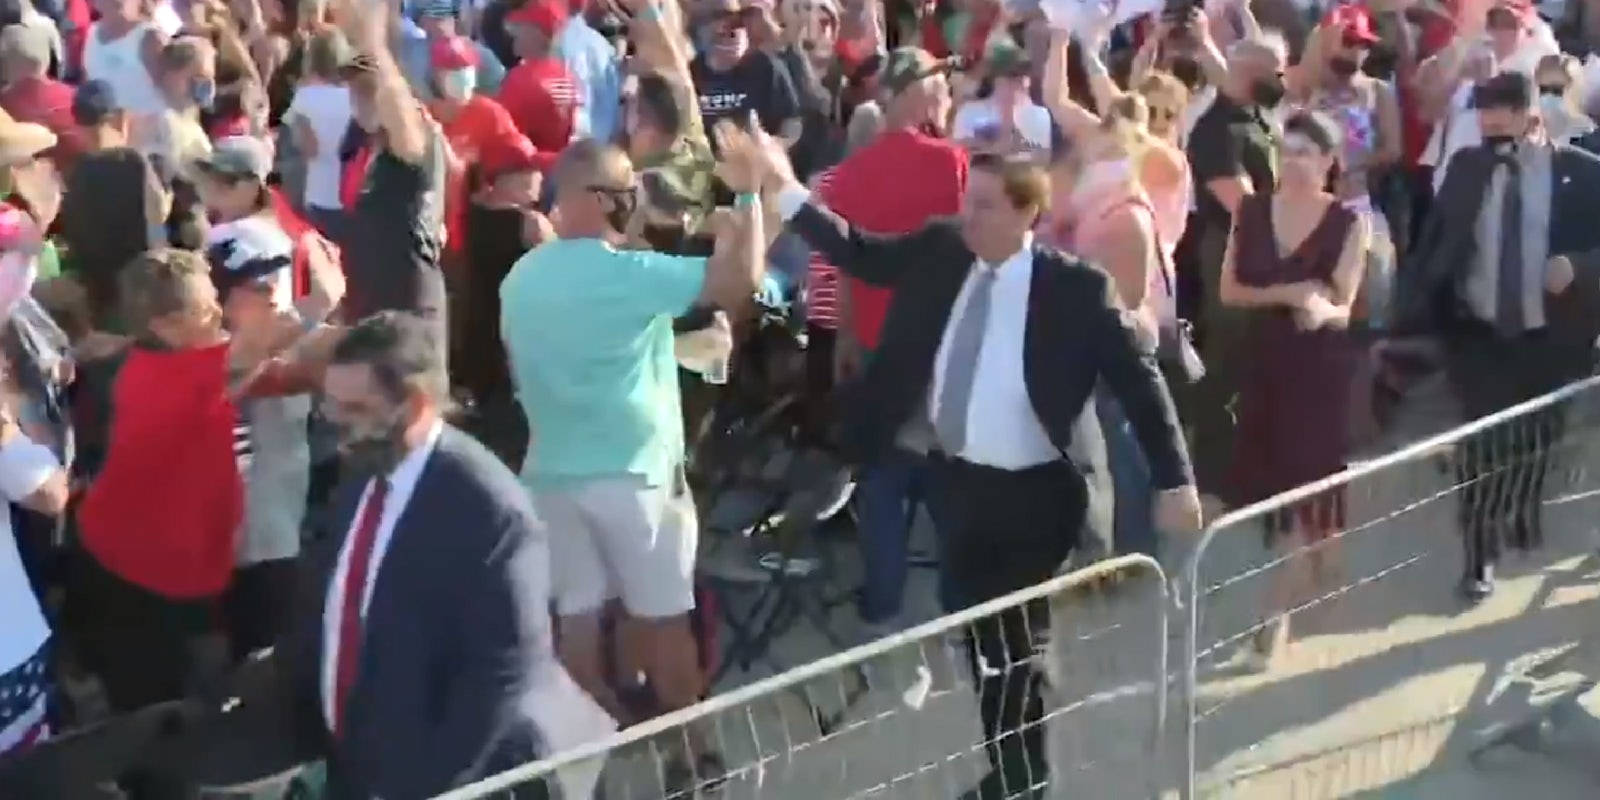 Ron DeSantis high fives people in crowd